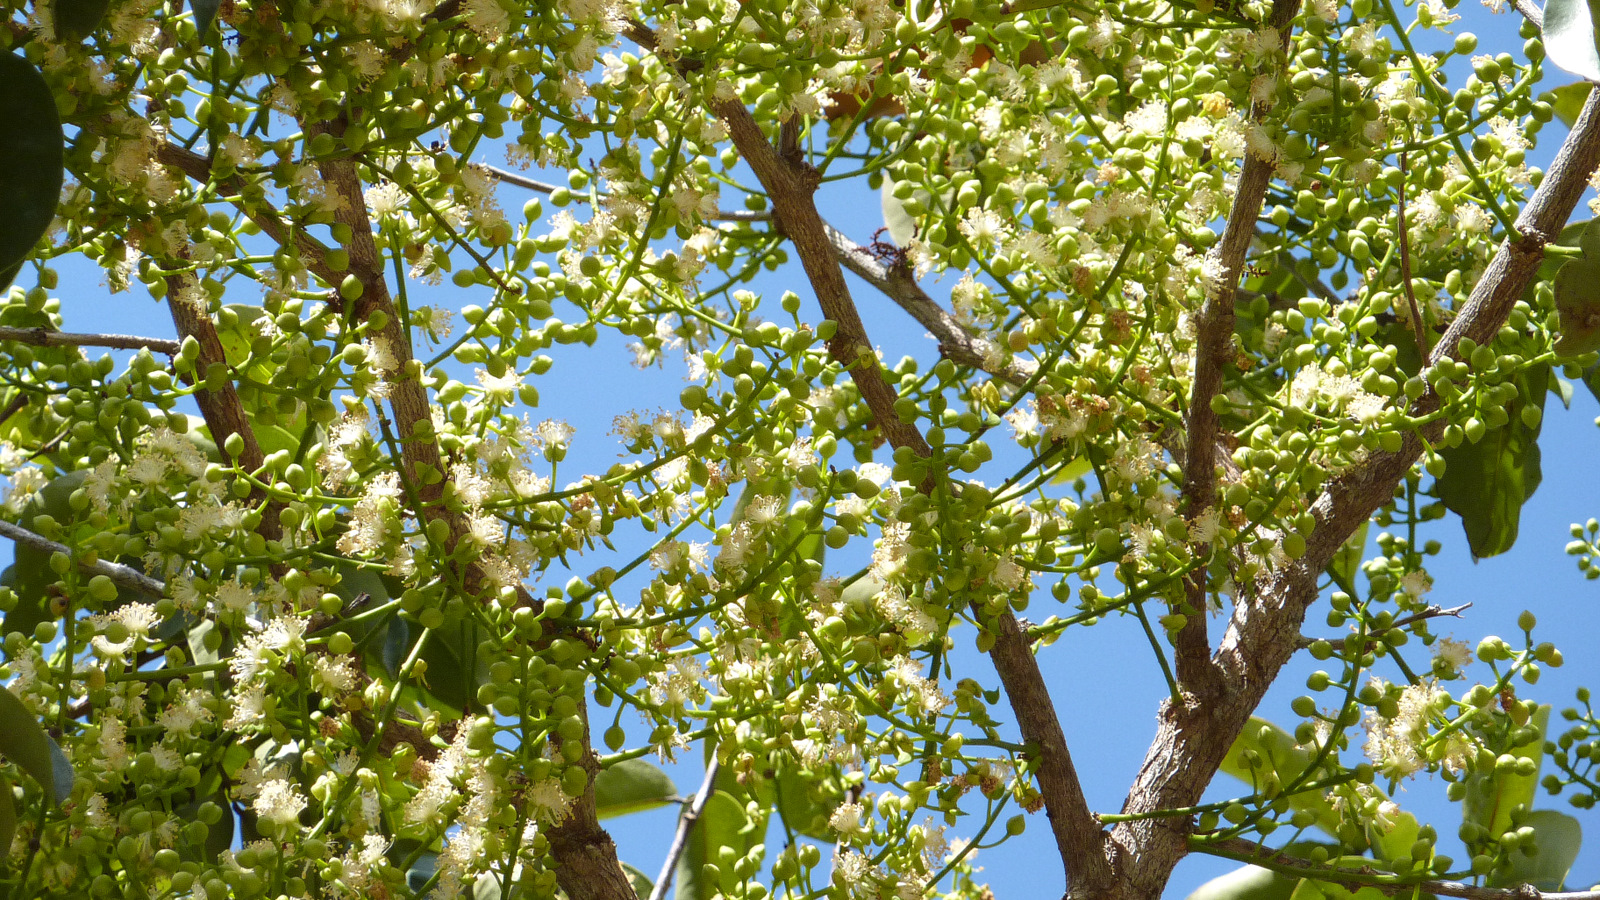 a close up of the leaves and flowers of a tree